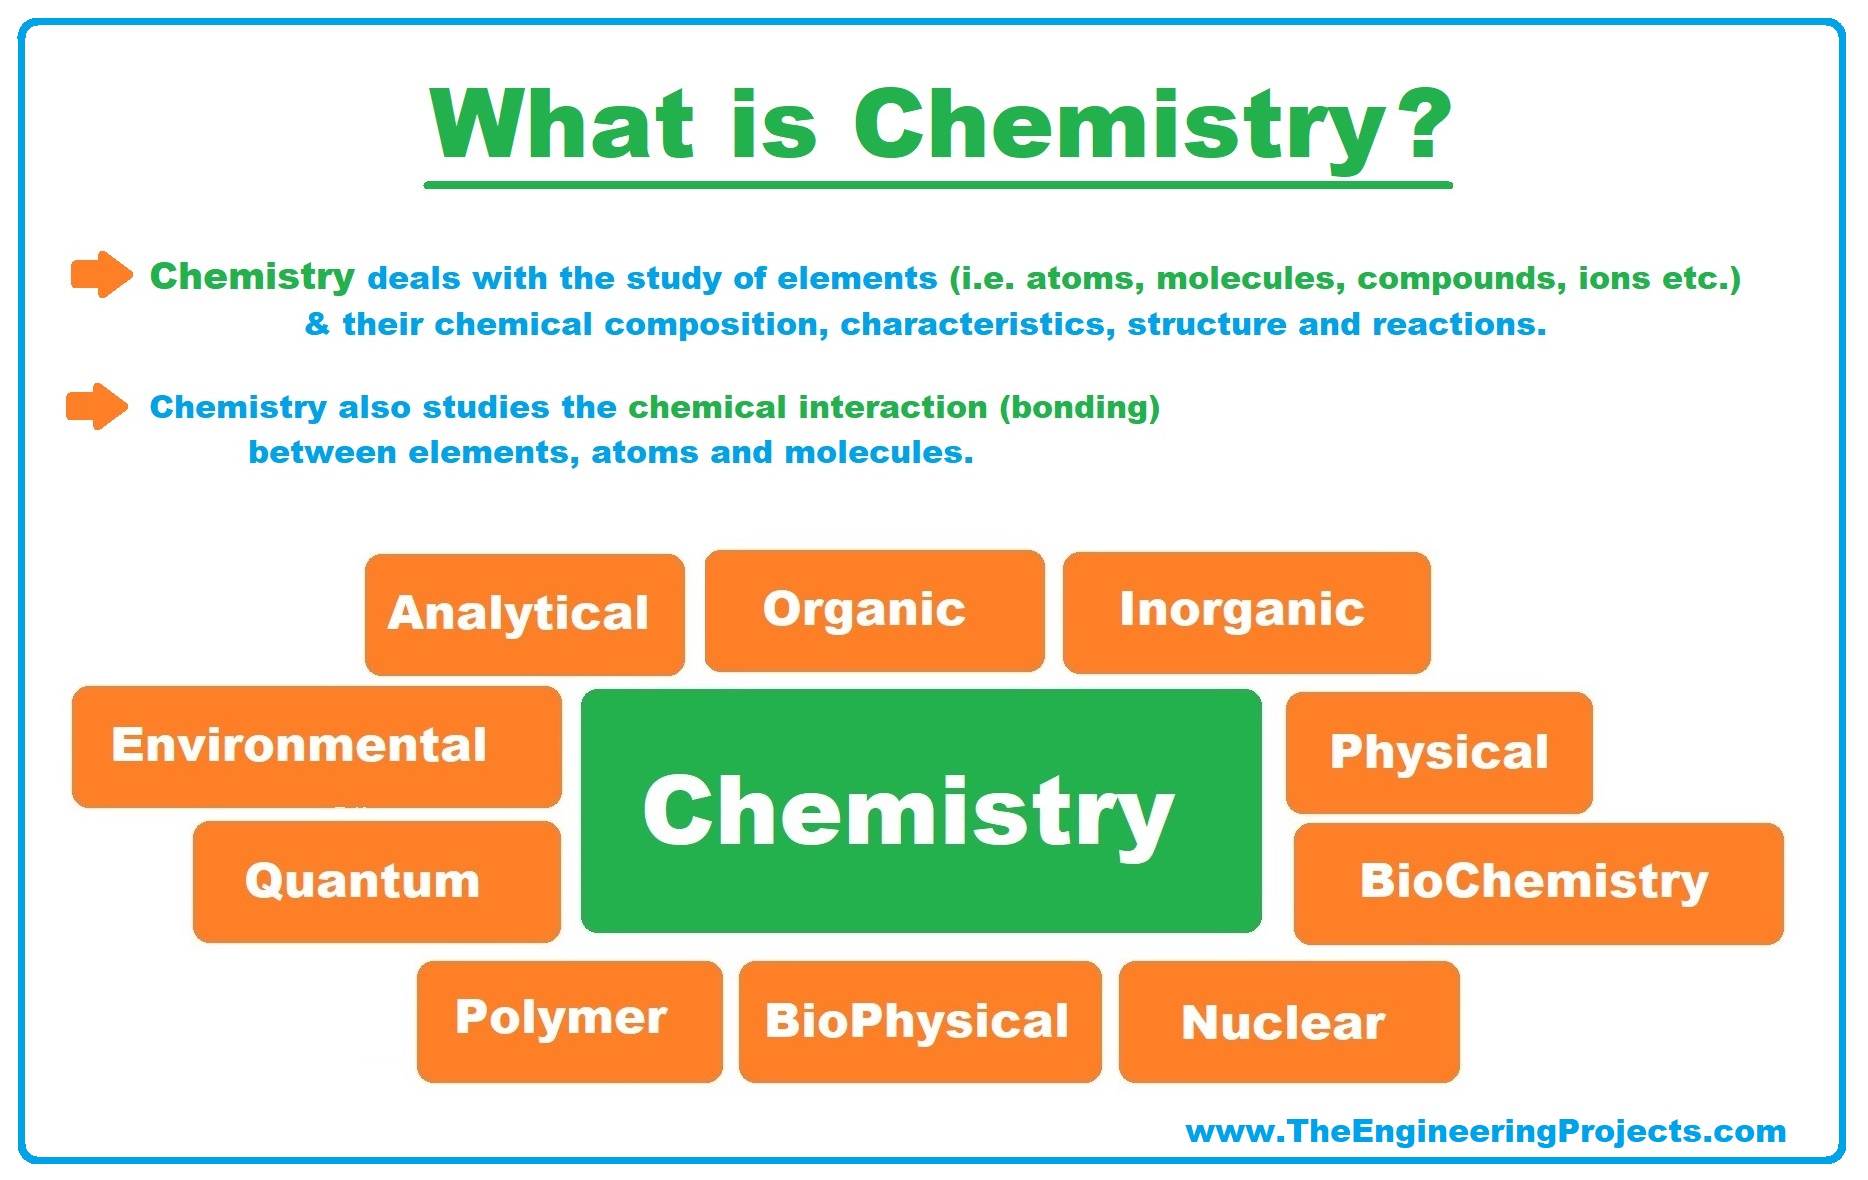 What is Chemistry? Definition, Branches, Books and Scientists - The  Engineering Projects